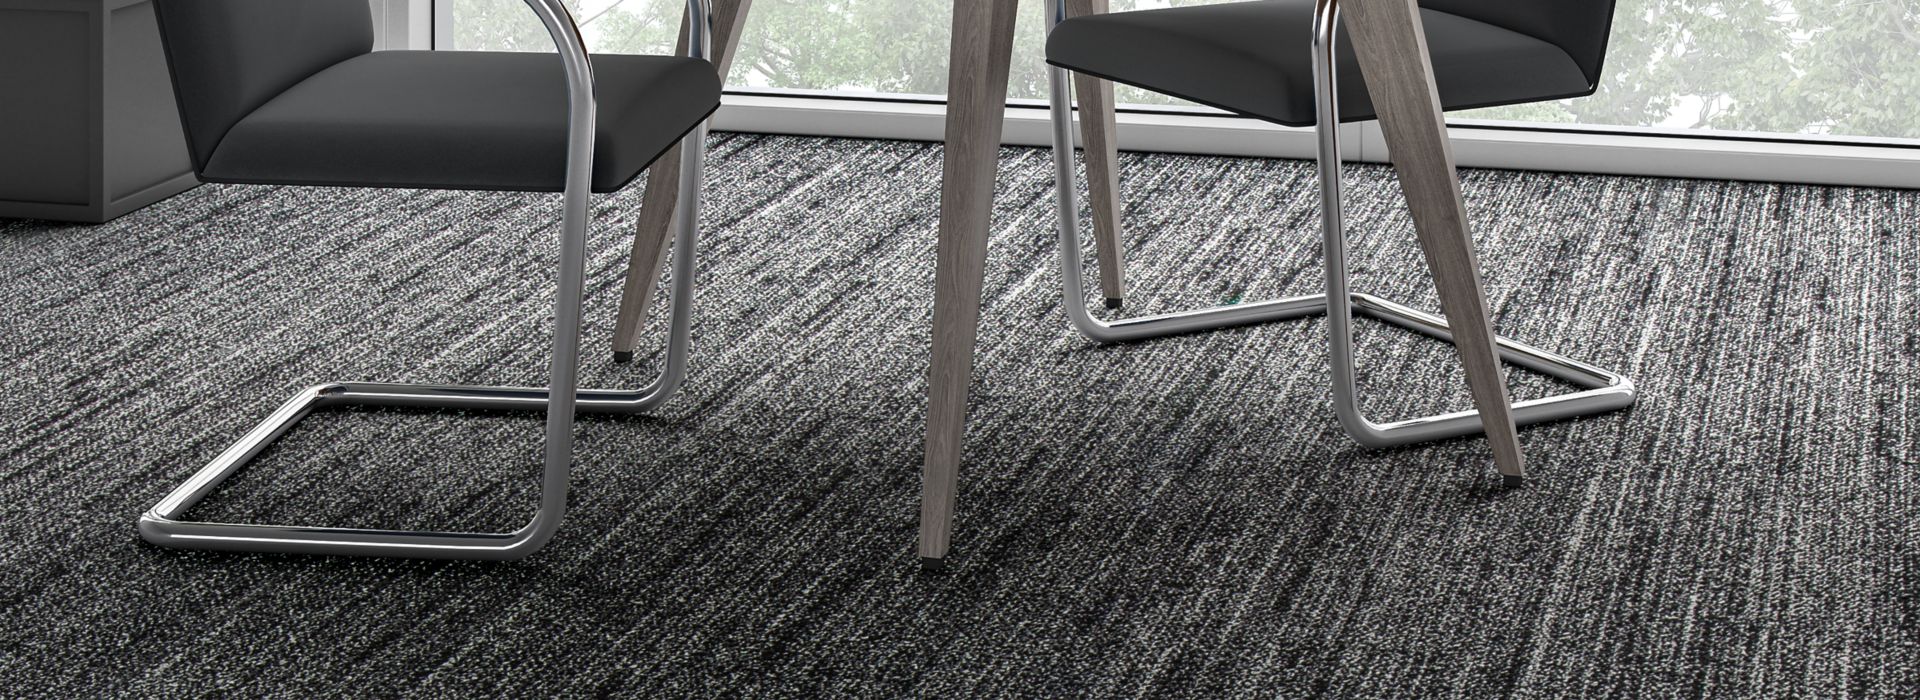 Interface WW870 plank carpet tile shown with small table and chairs image number 1